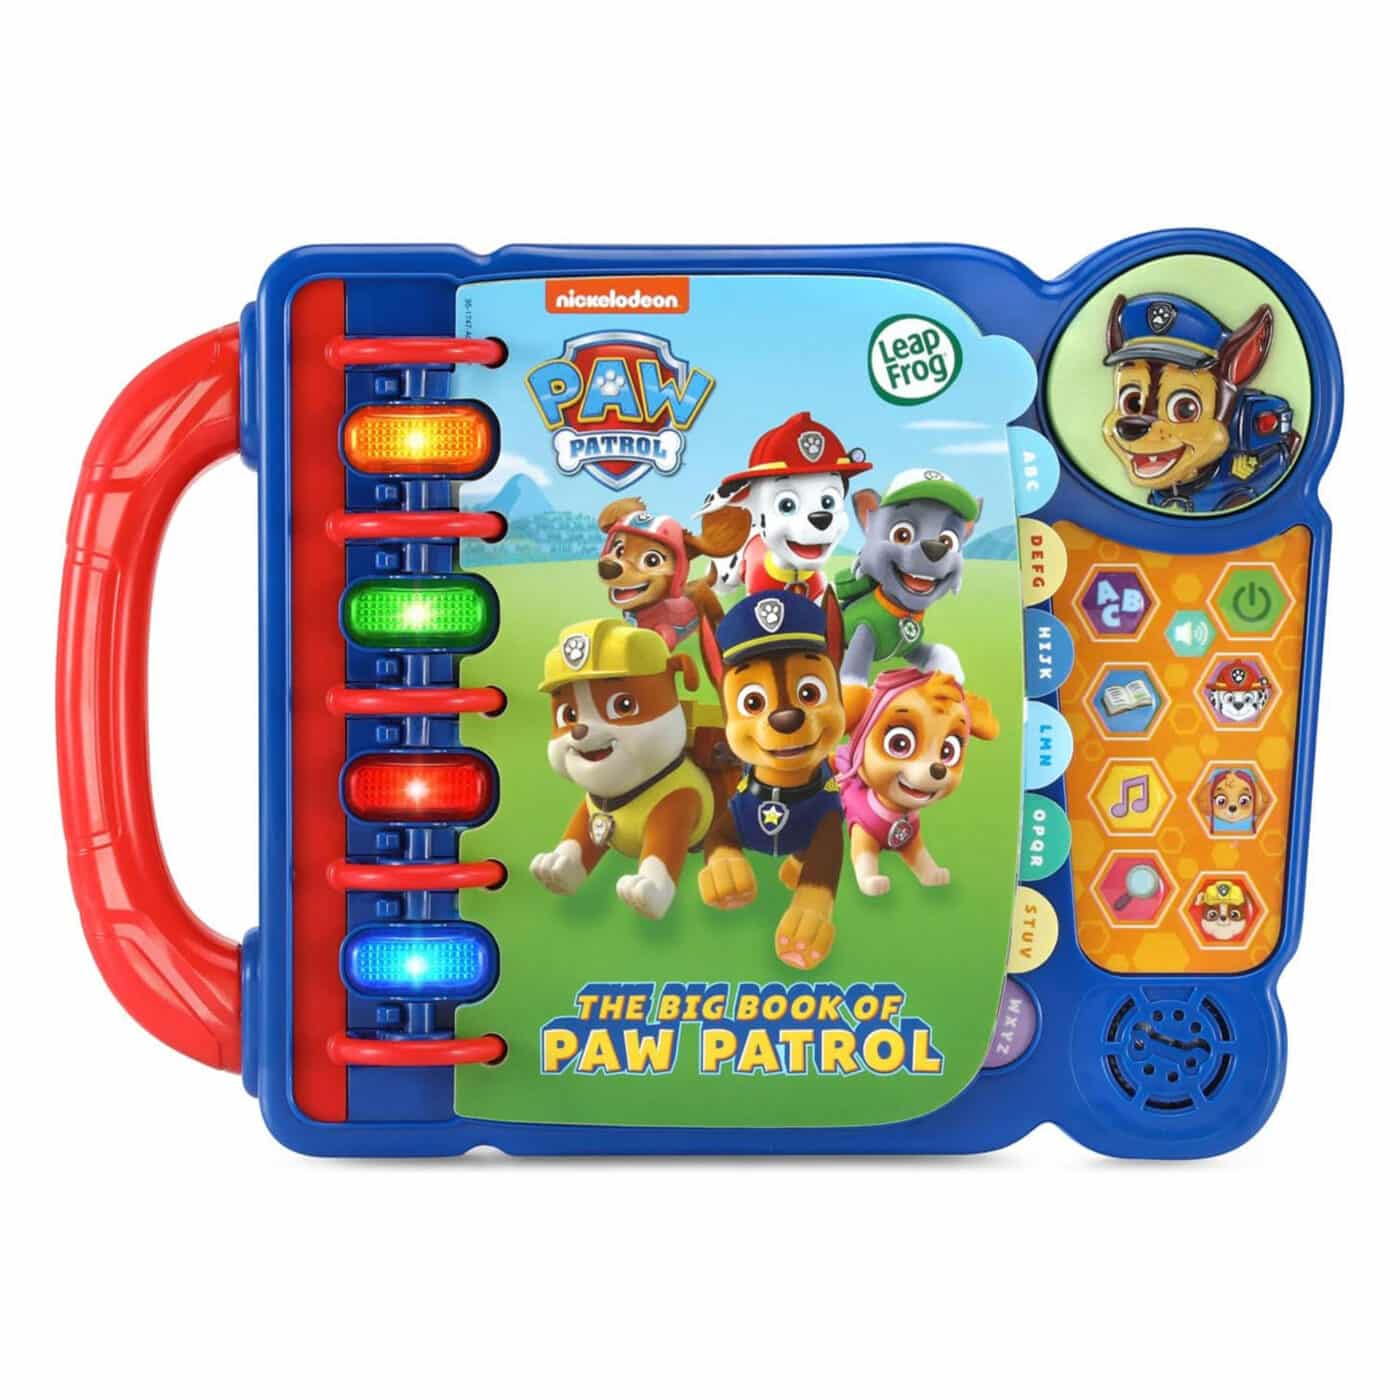 LeapFrog - The Big Book of Paw Patrol1